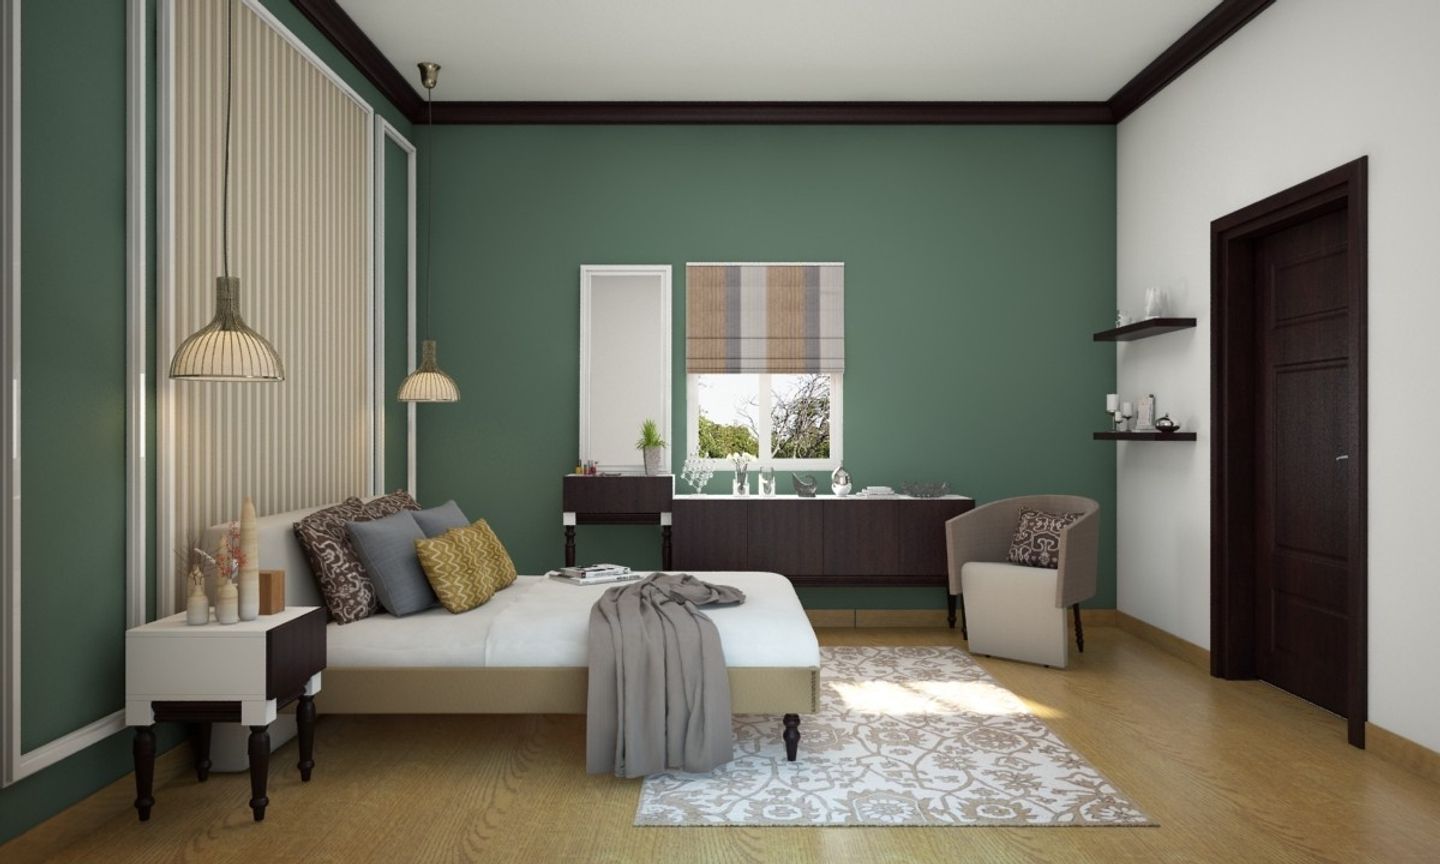 Classic Guest Bedroom Design In Green And Black With Wall Design